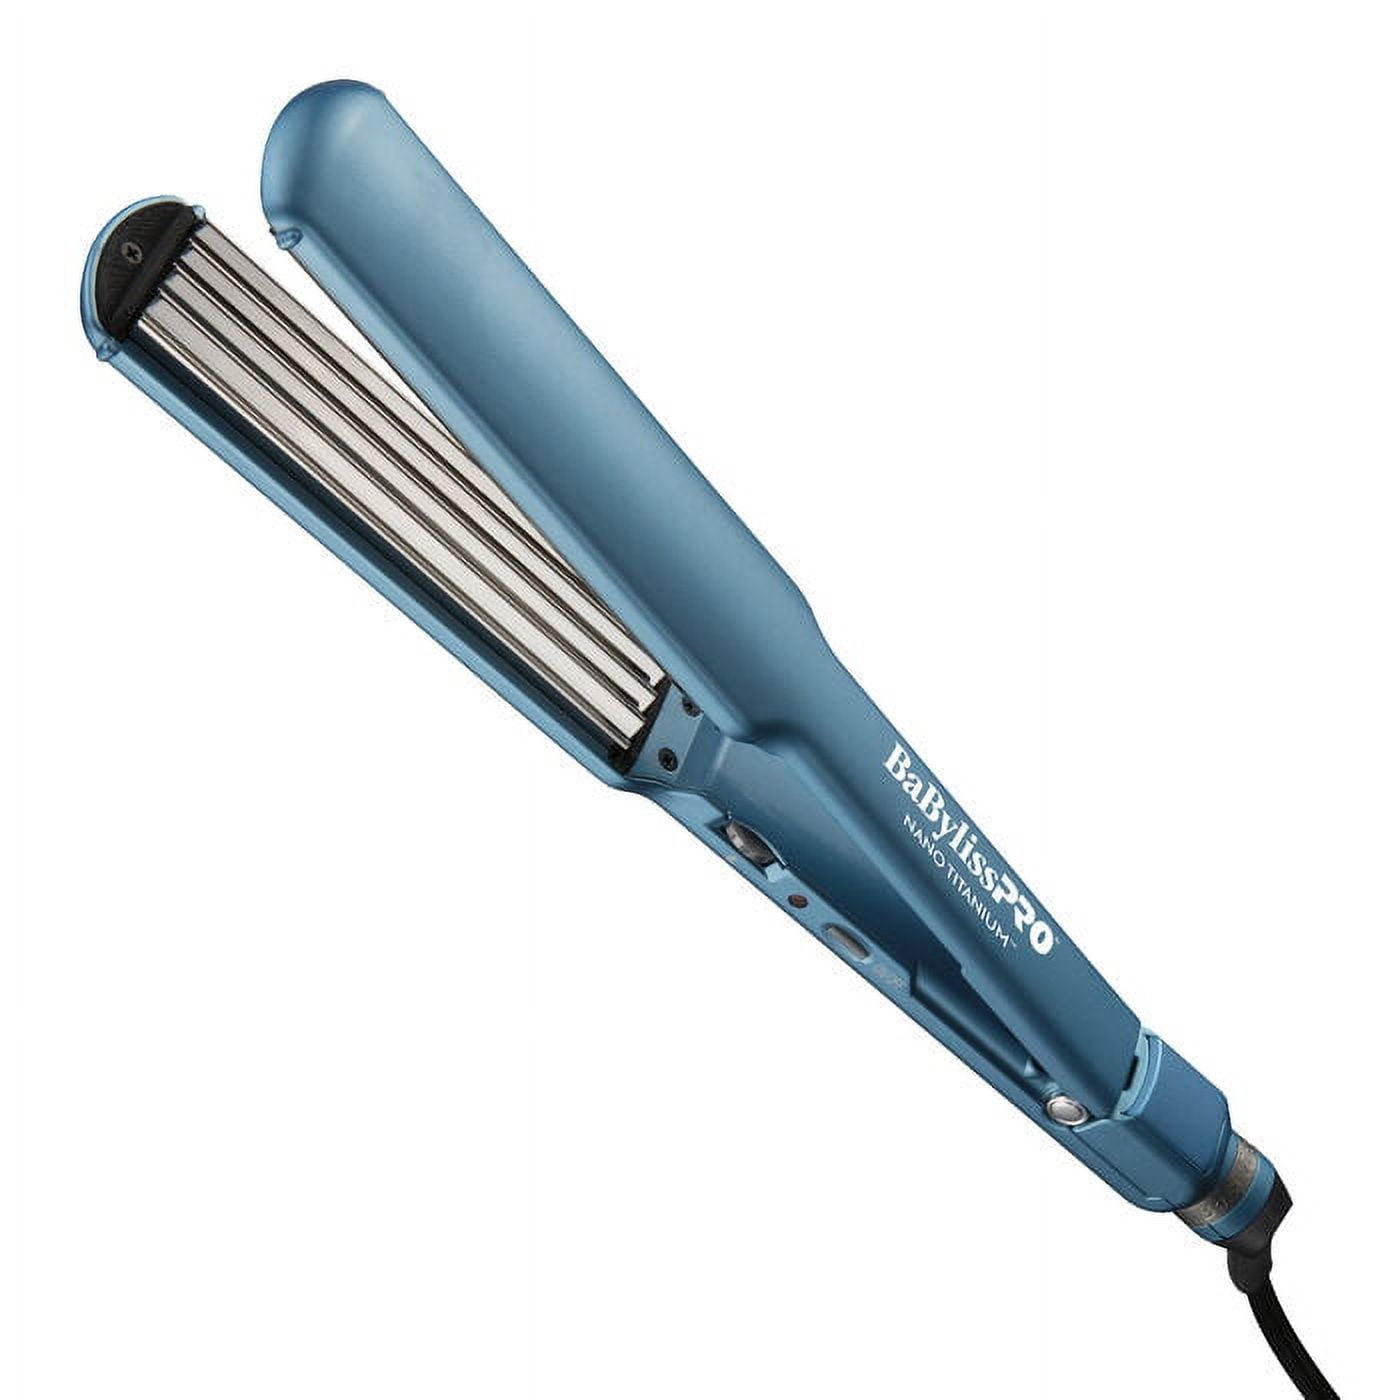 Leyeet Hair Crimper for Women with Crimper Hair Iron with 5 Heat